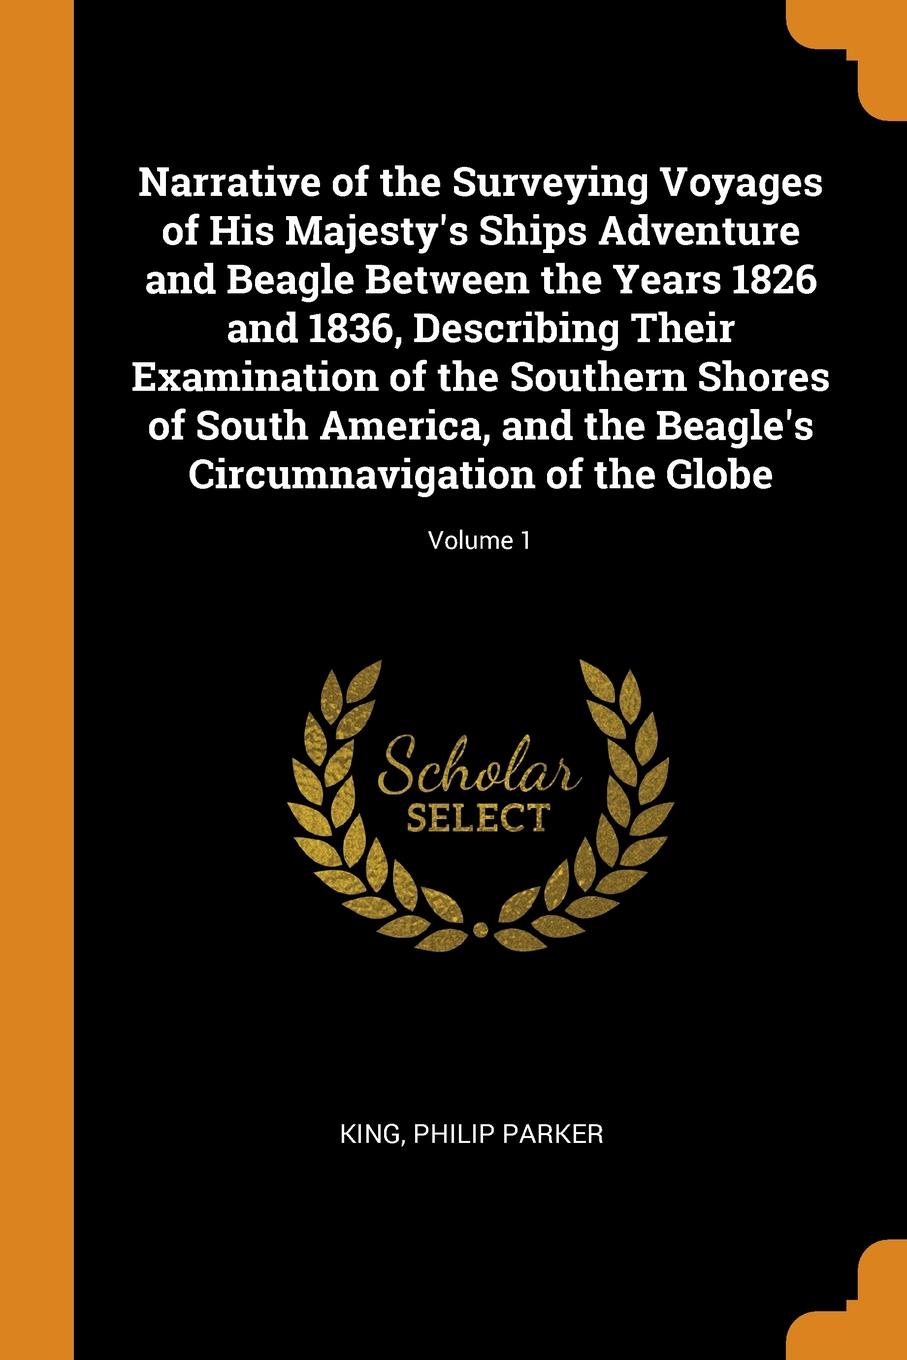 Narrative of the Surveying Voyages of His Majesty.s Ships Adventure and Beagle Between the Years 1826 and 1836, Describing Their Examination of the Southern Shores of South America, and the Beagle.s Circumnavigation of the Globe; Volume 1